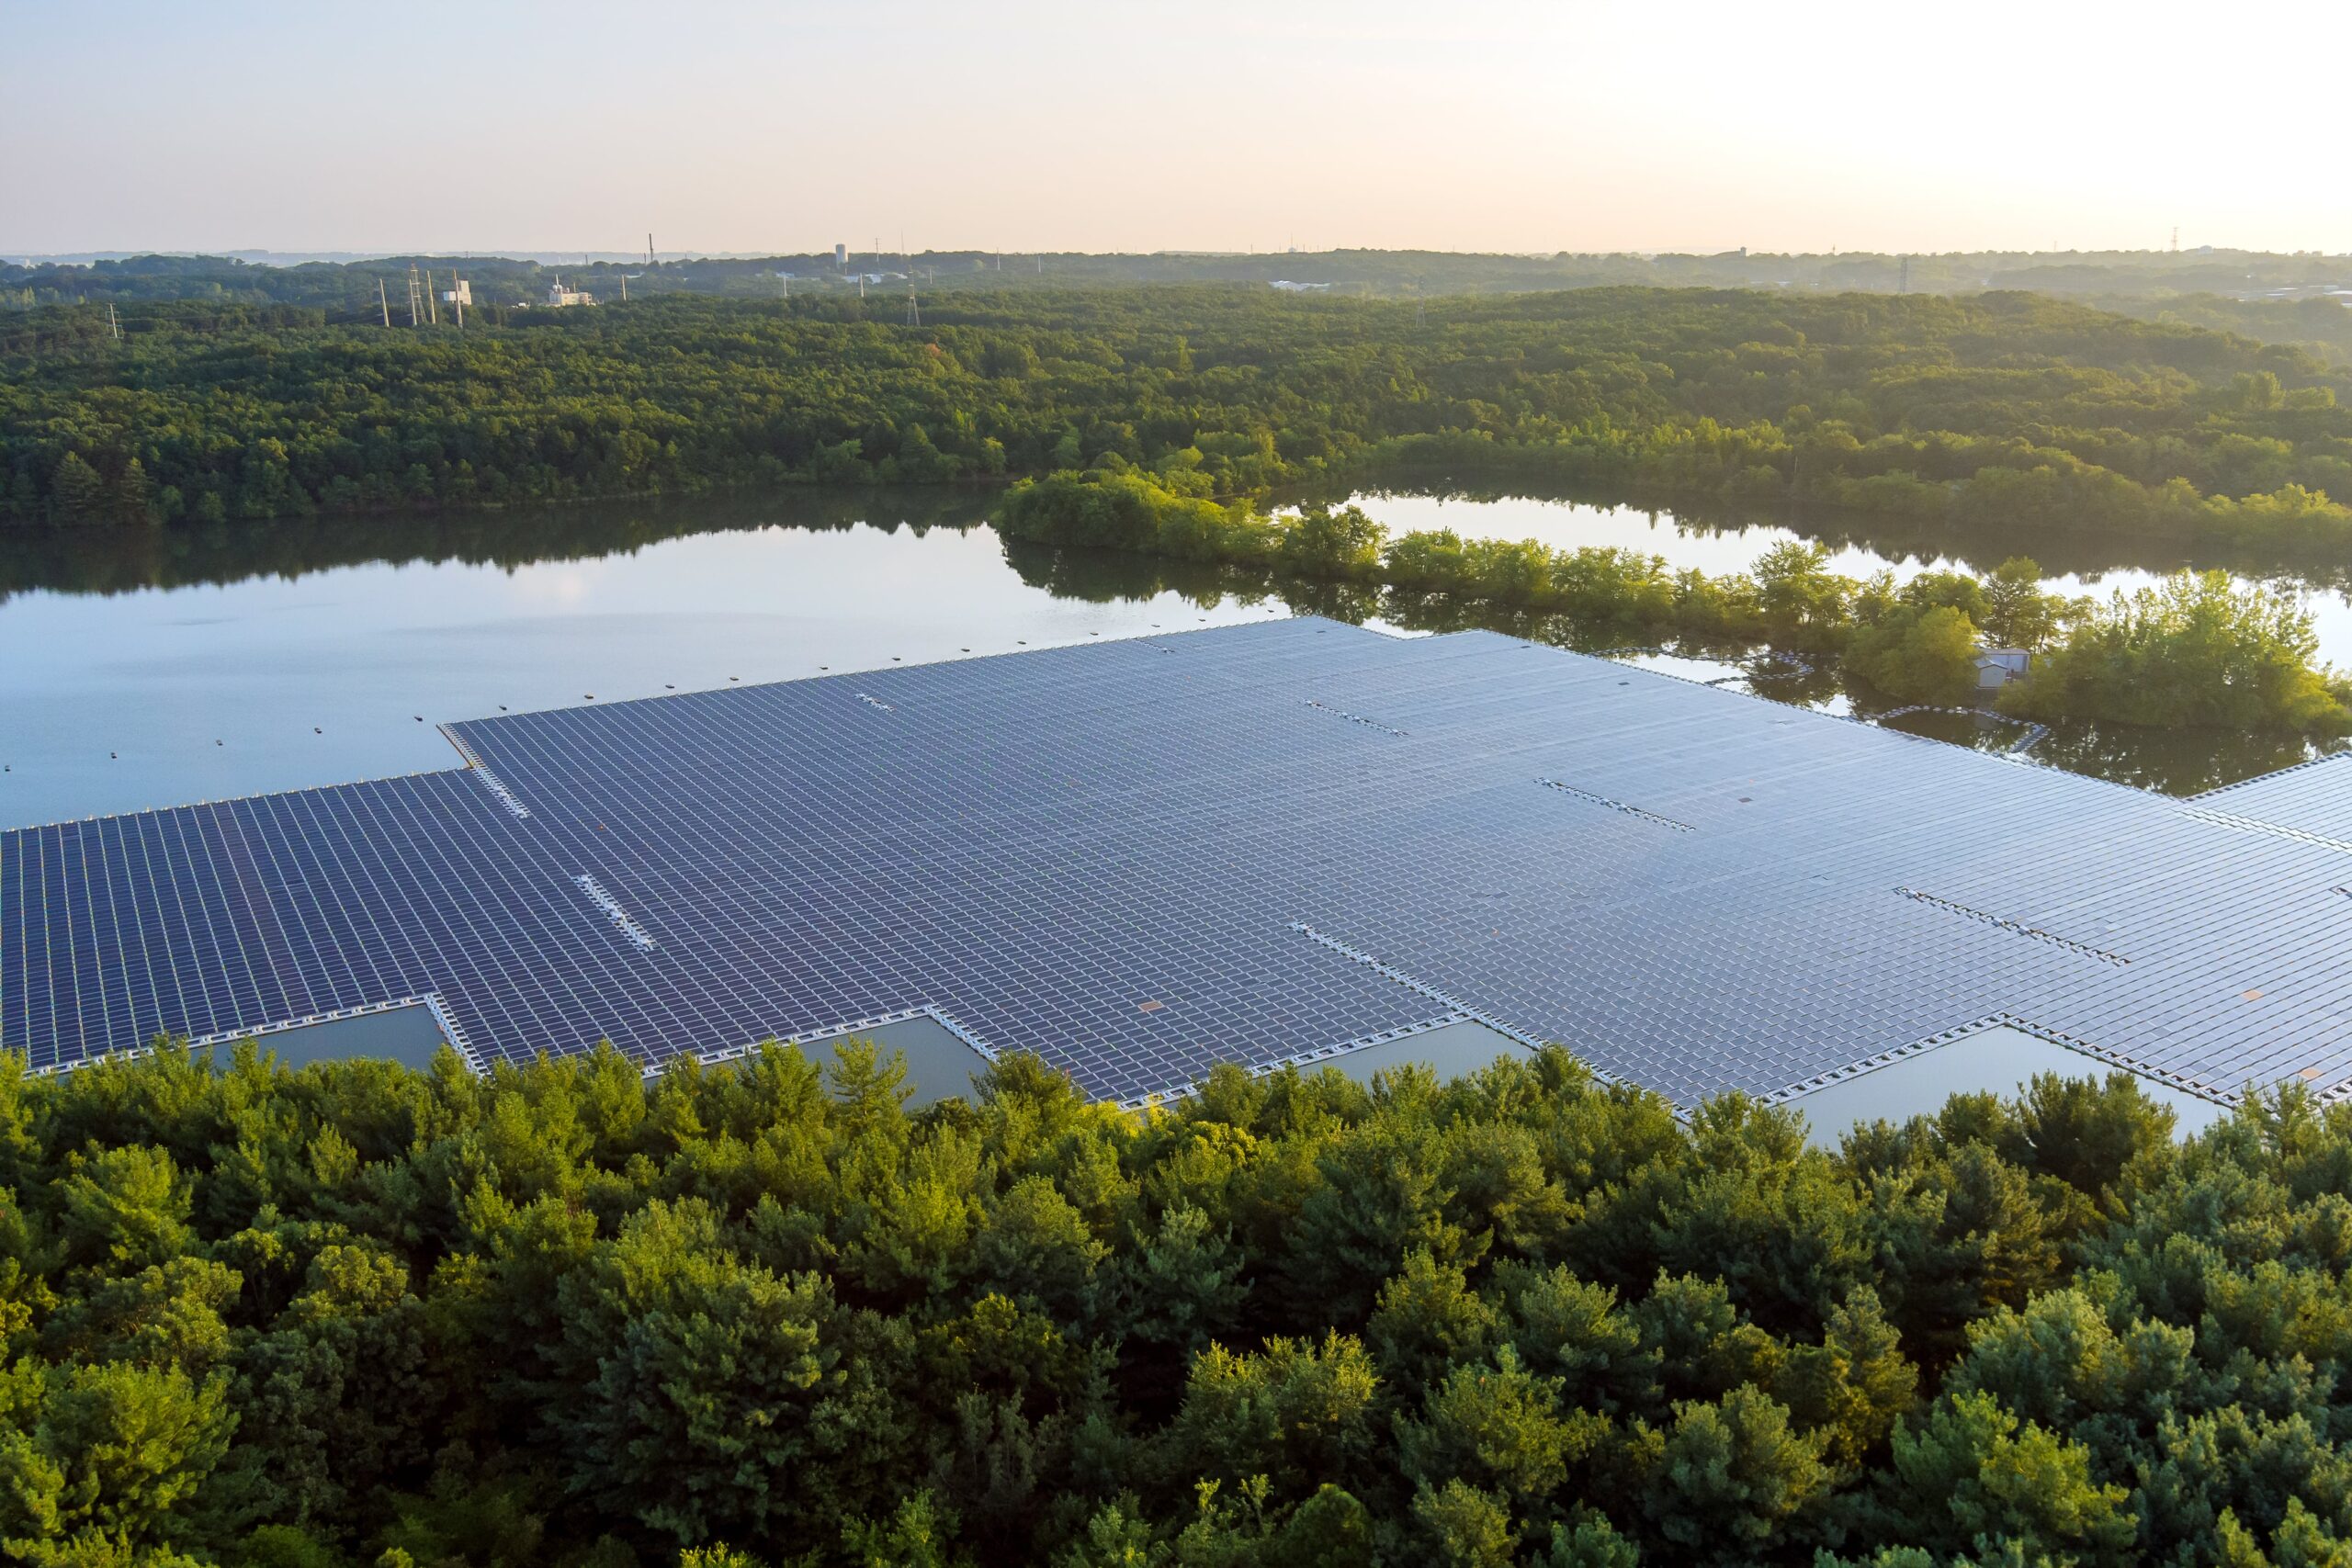 https://doradcy365.pl/wp-content/uploads/2022/03/panorama-aerial-view-renewable-alternative-electricity-energy-floating-solar-panels-cell-platform-beautiful-lake-min-scaled.jpg